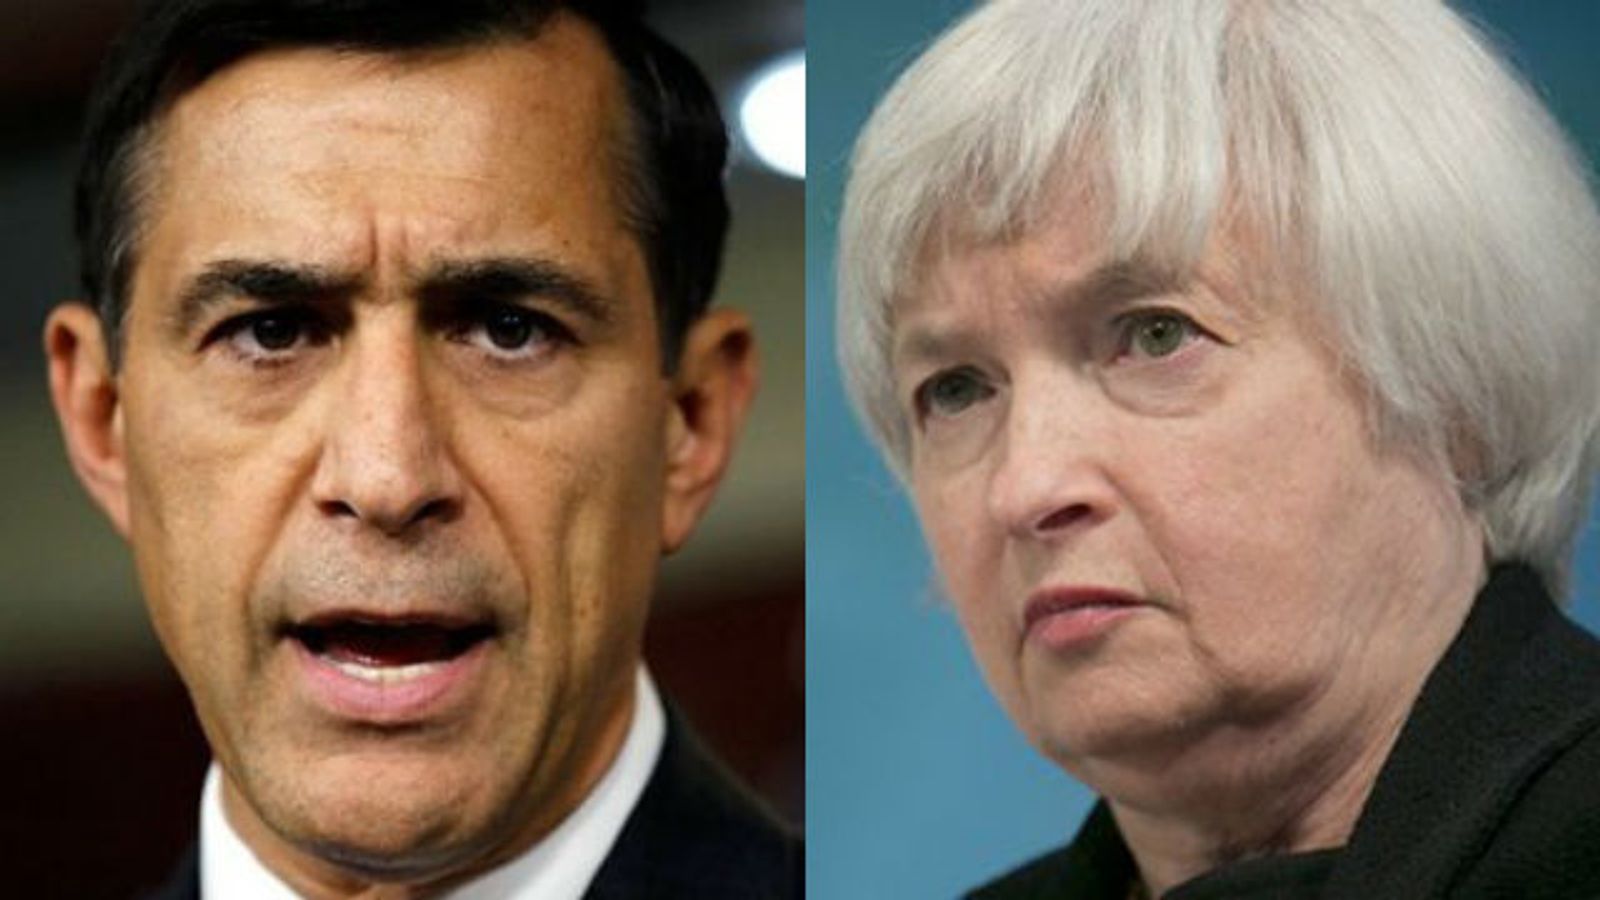 Rep. Issa Accuses Fed of Complicity in Operation Choke Hold